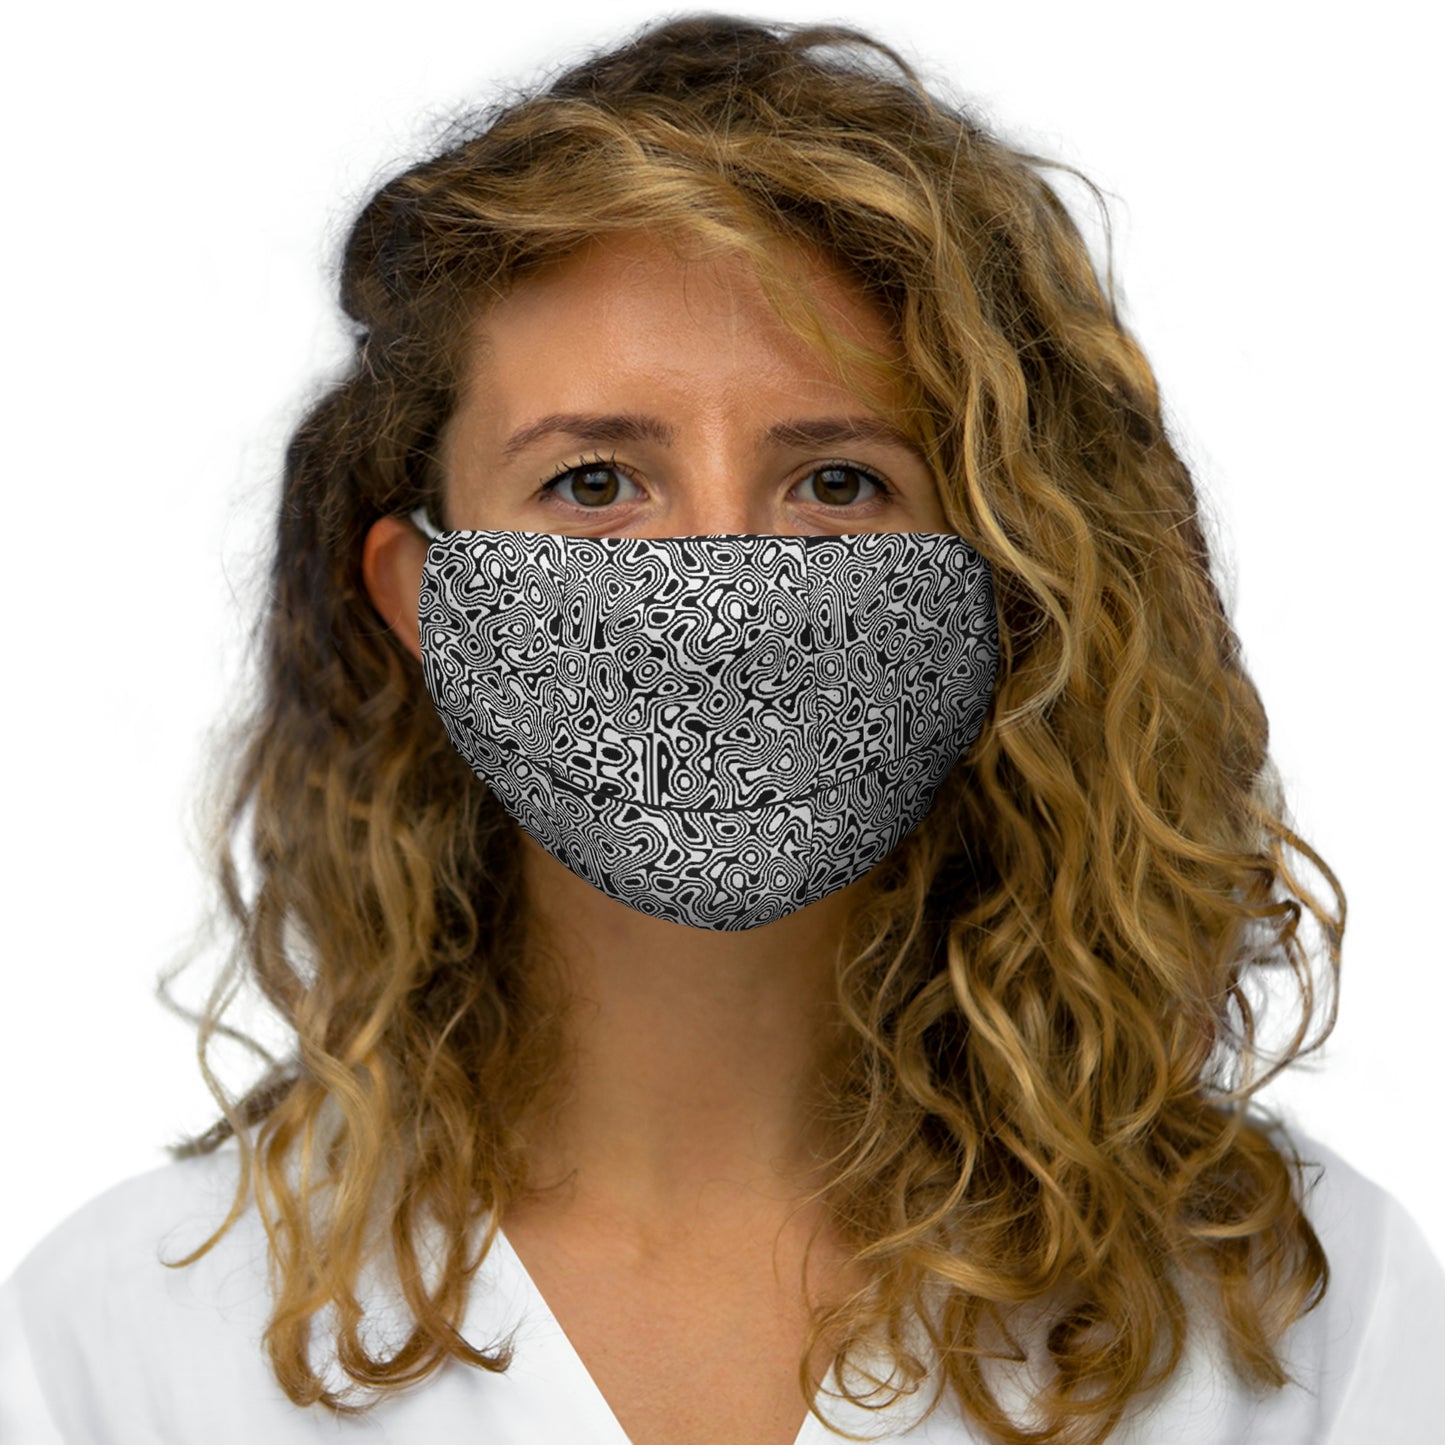 Anti Facial Recognition / Adversarial Pattern Snug-Fit Face Mask